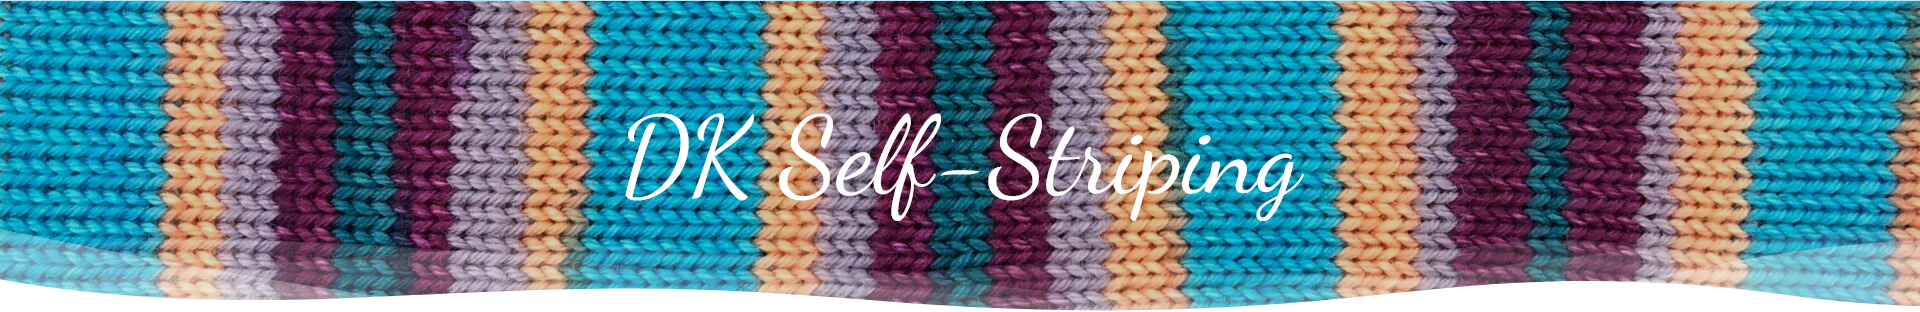 DK Self-striping yarns banner on kitted background